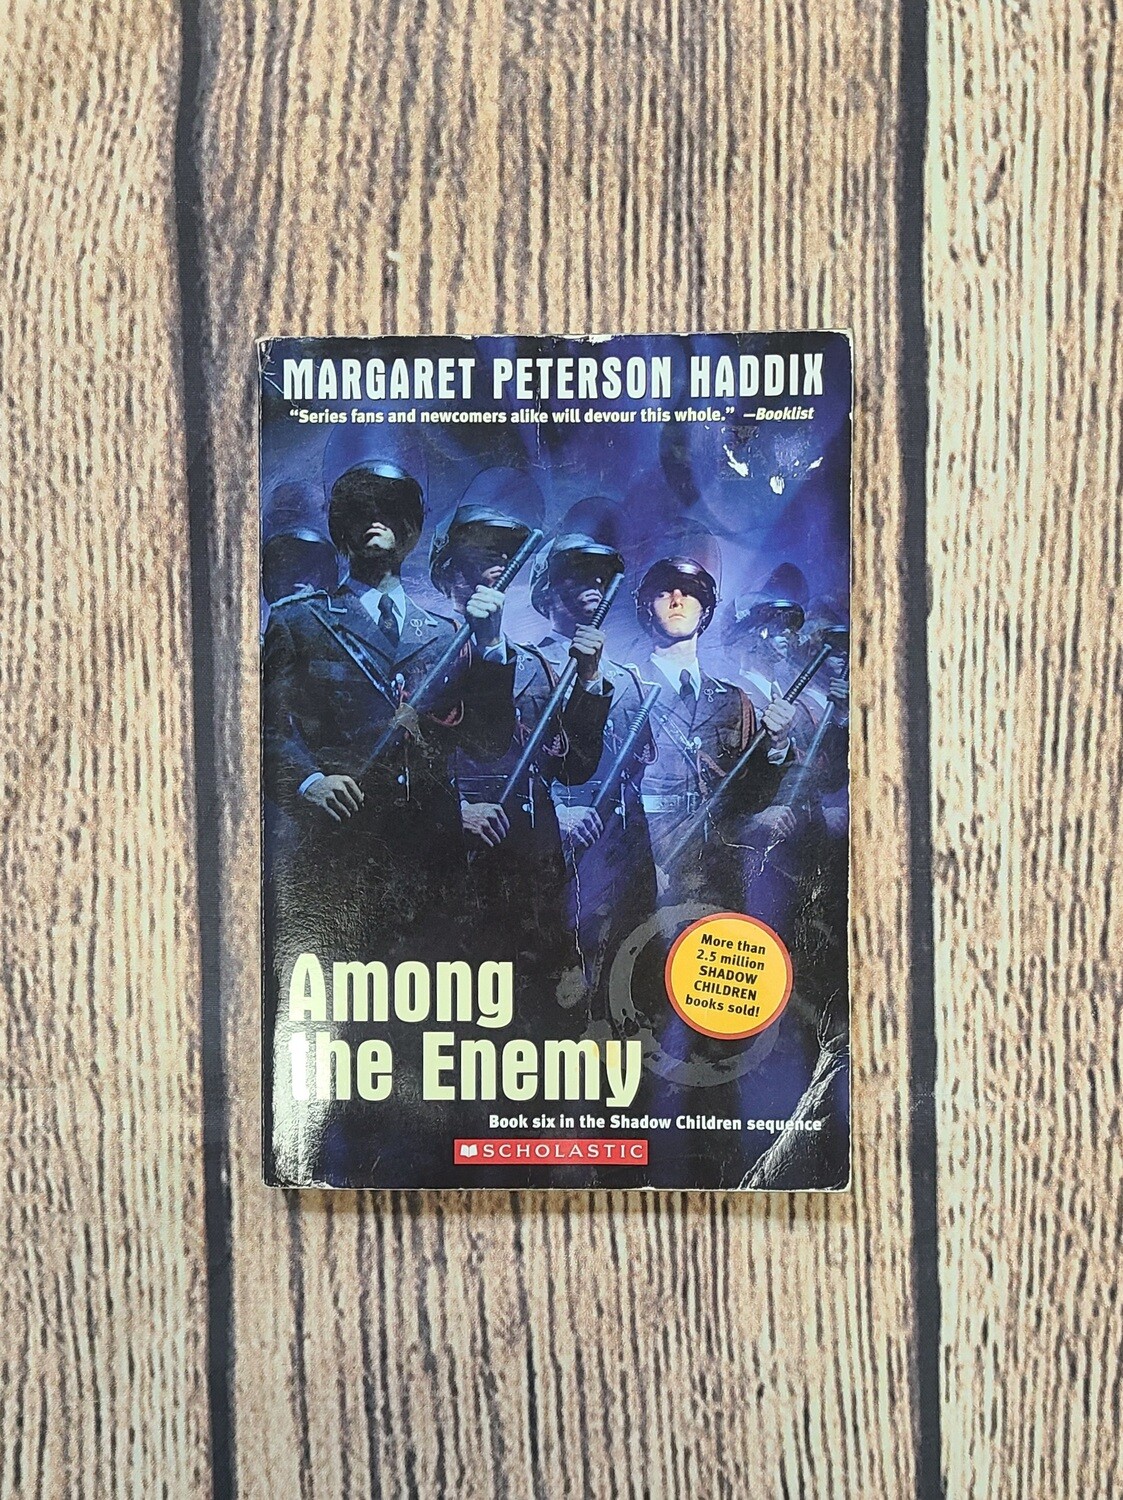 Among the Enemy by Margaret Peterson Haddix